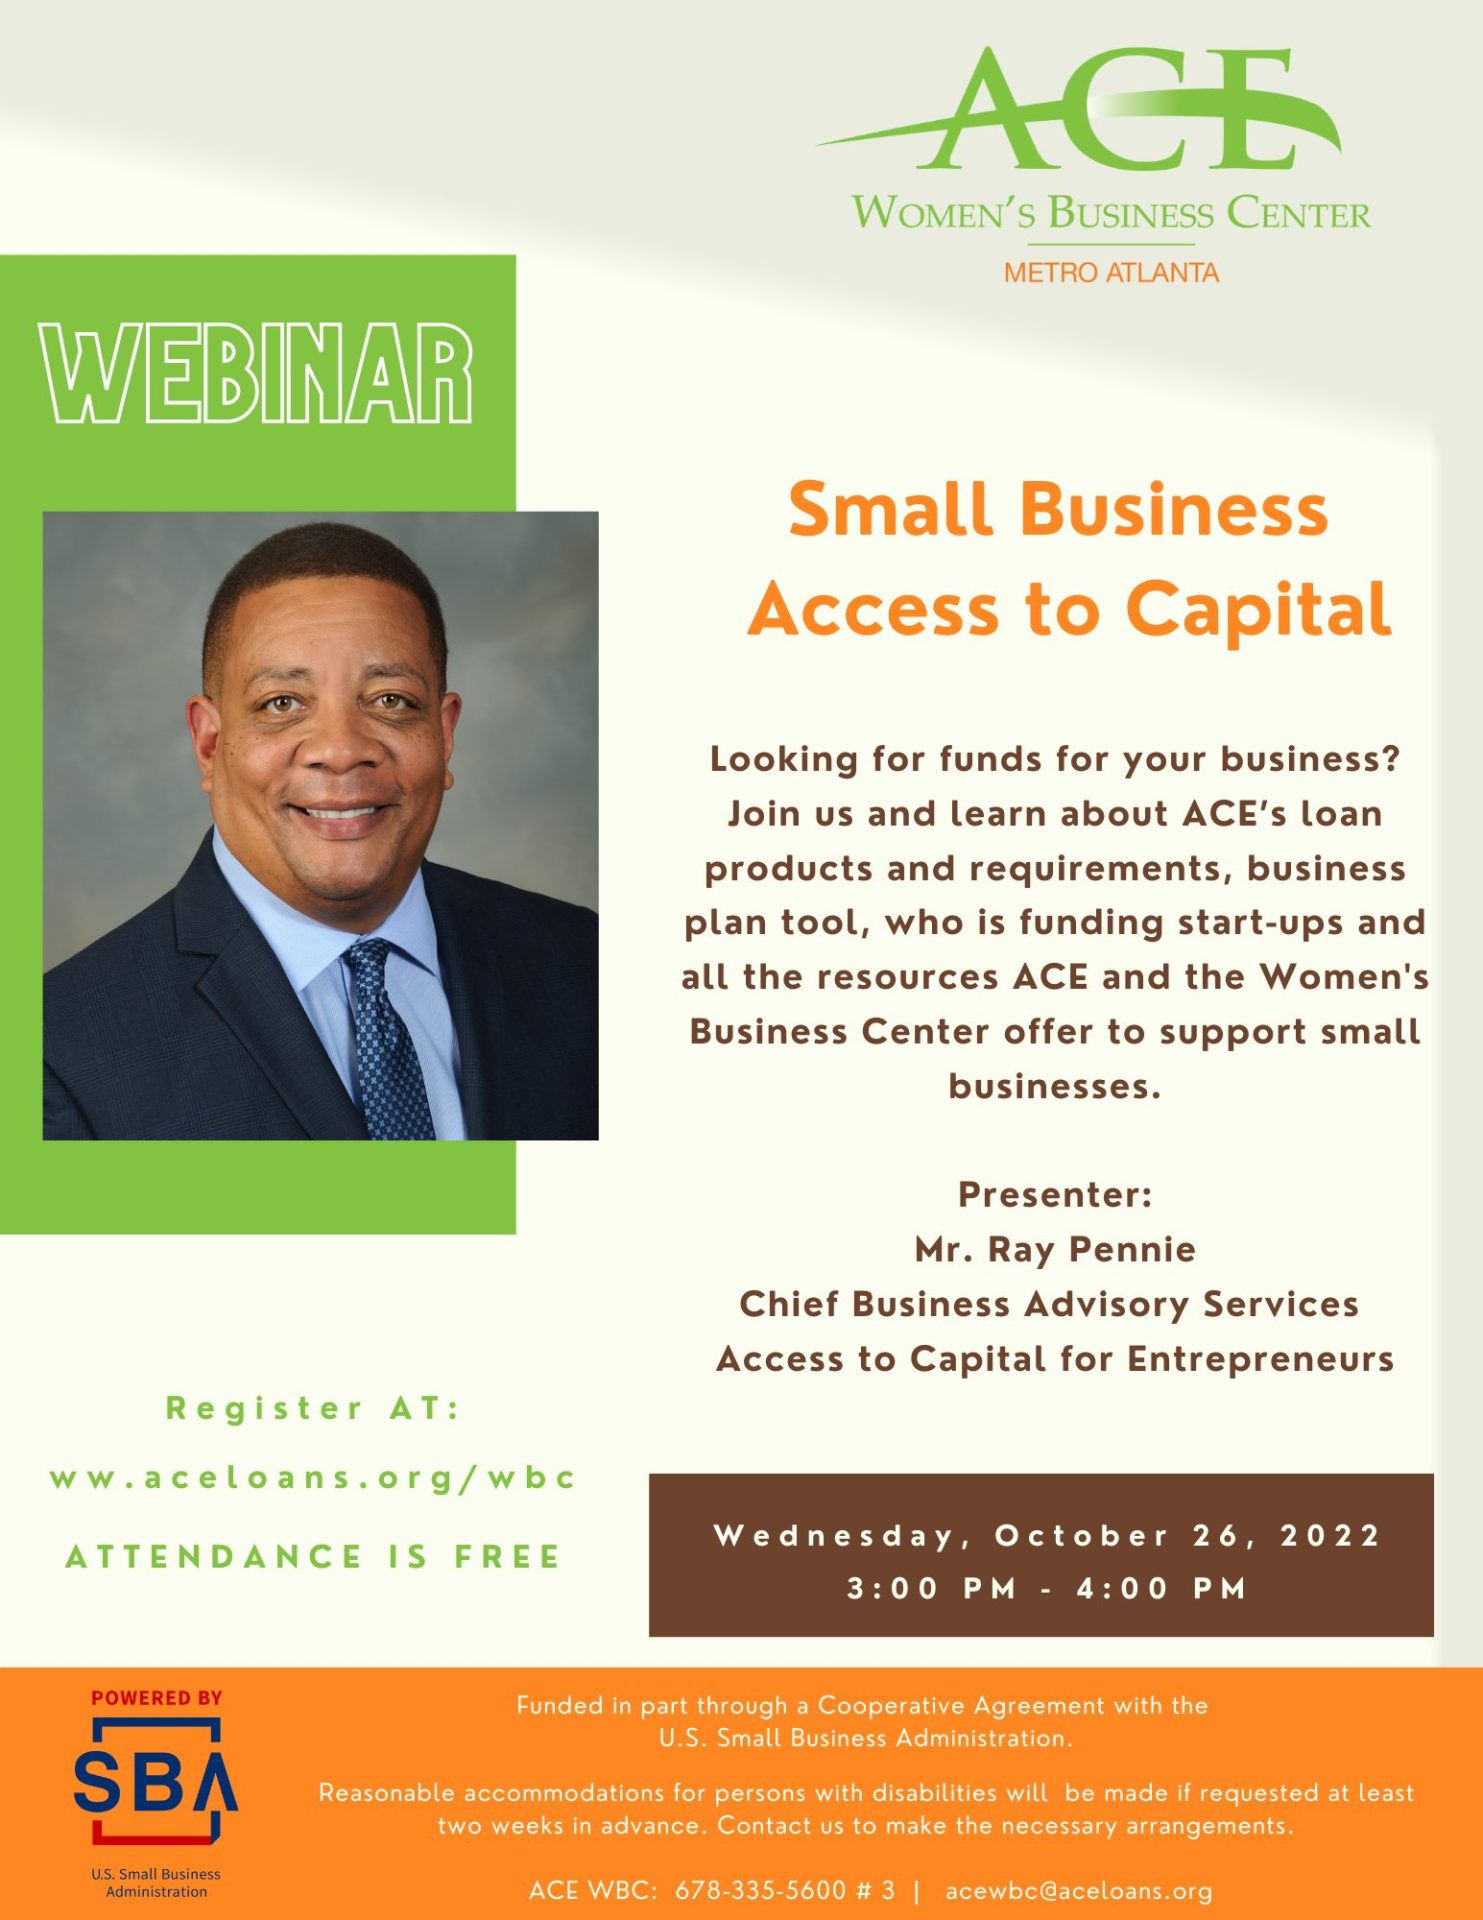 Small Business Access To Capital Access To Capital For Entrepreneurs